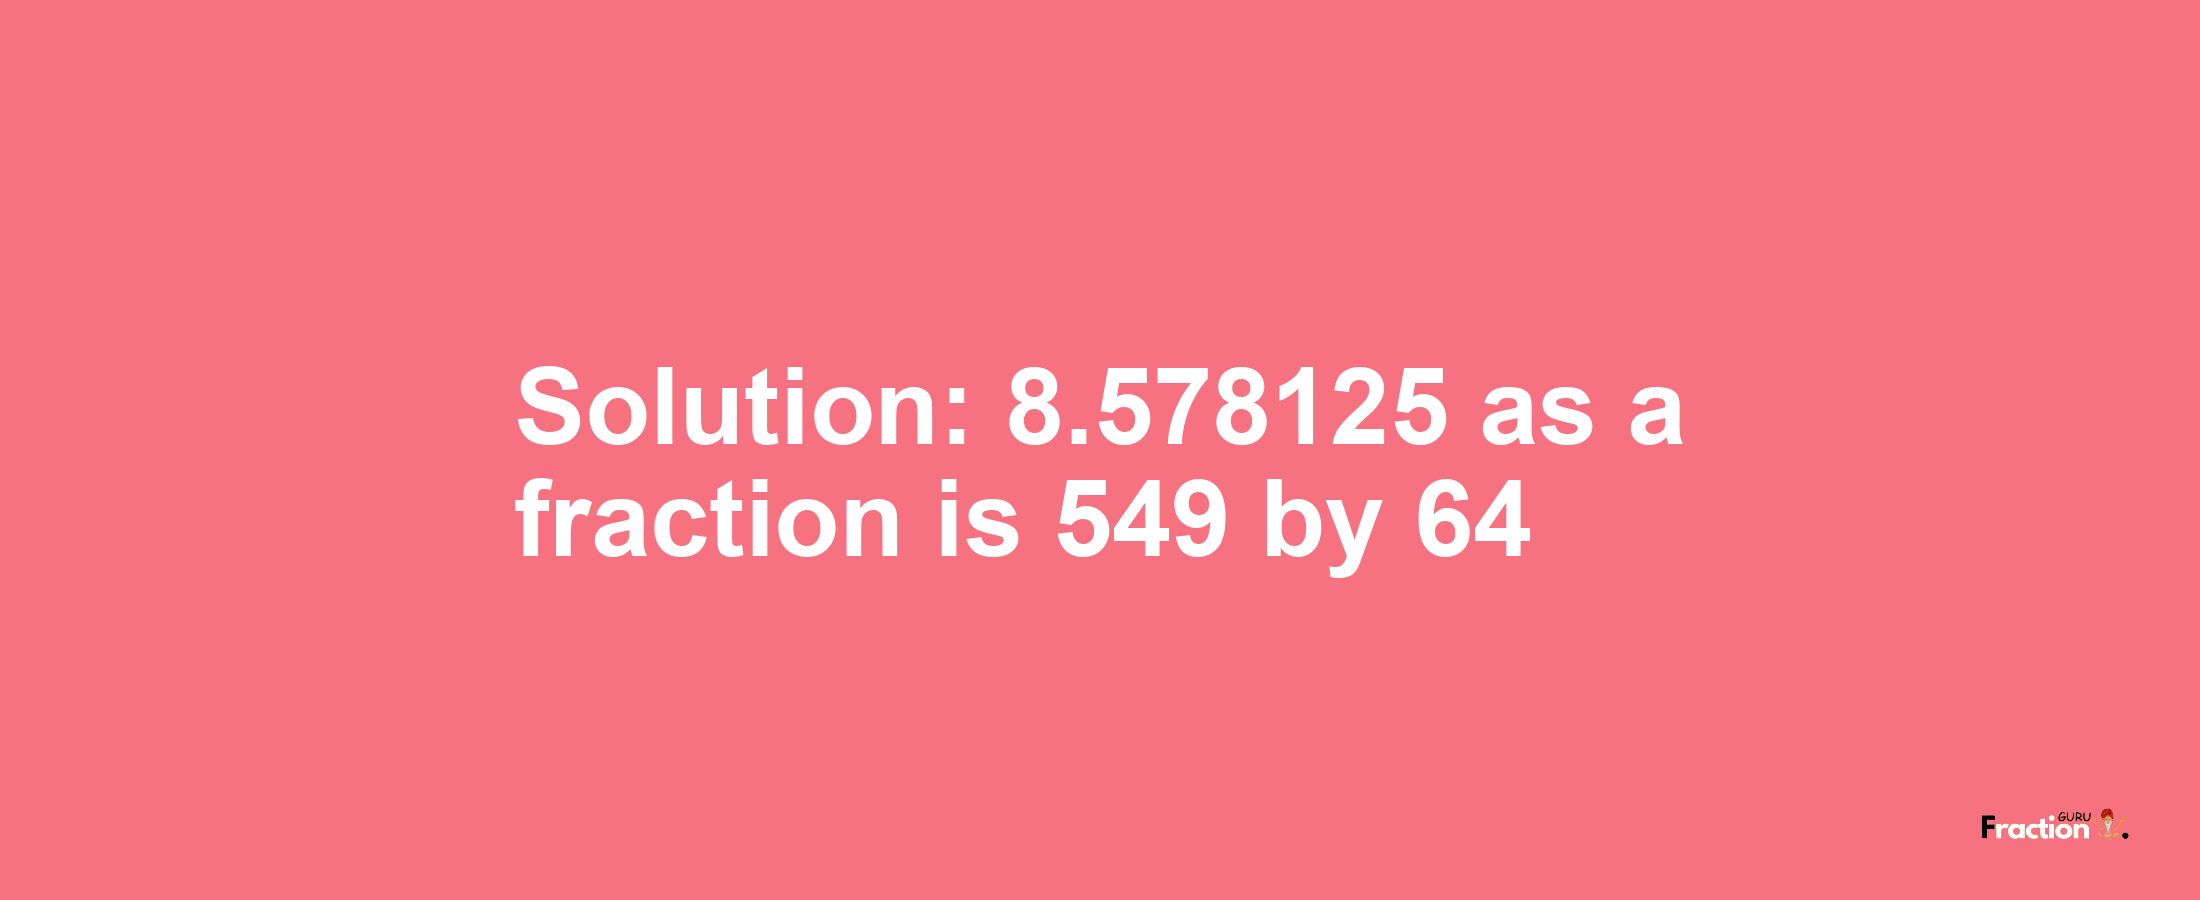 Solution:8.578125 as a fraction is 549/64